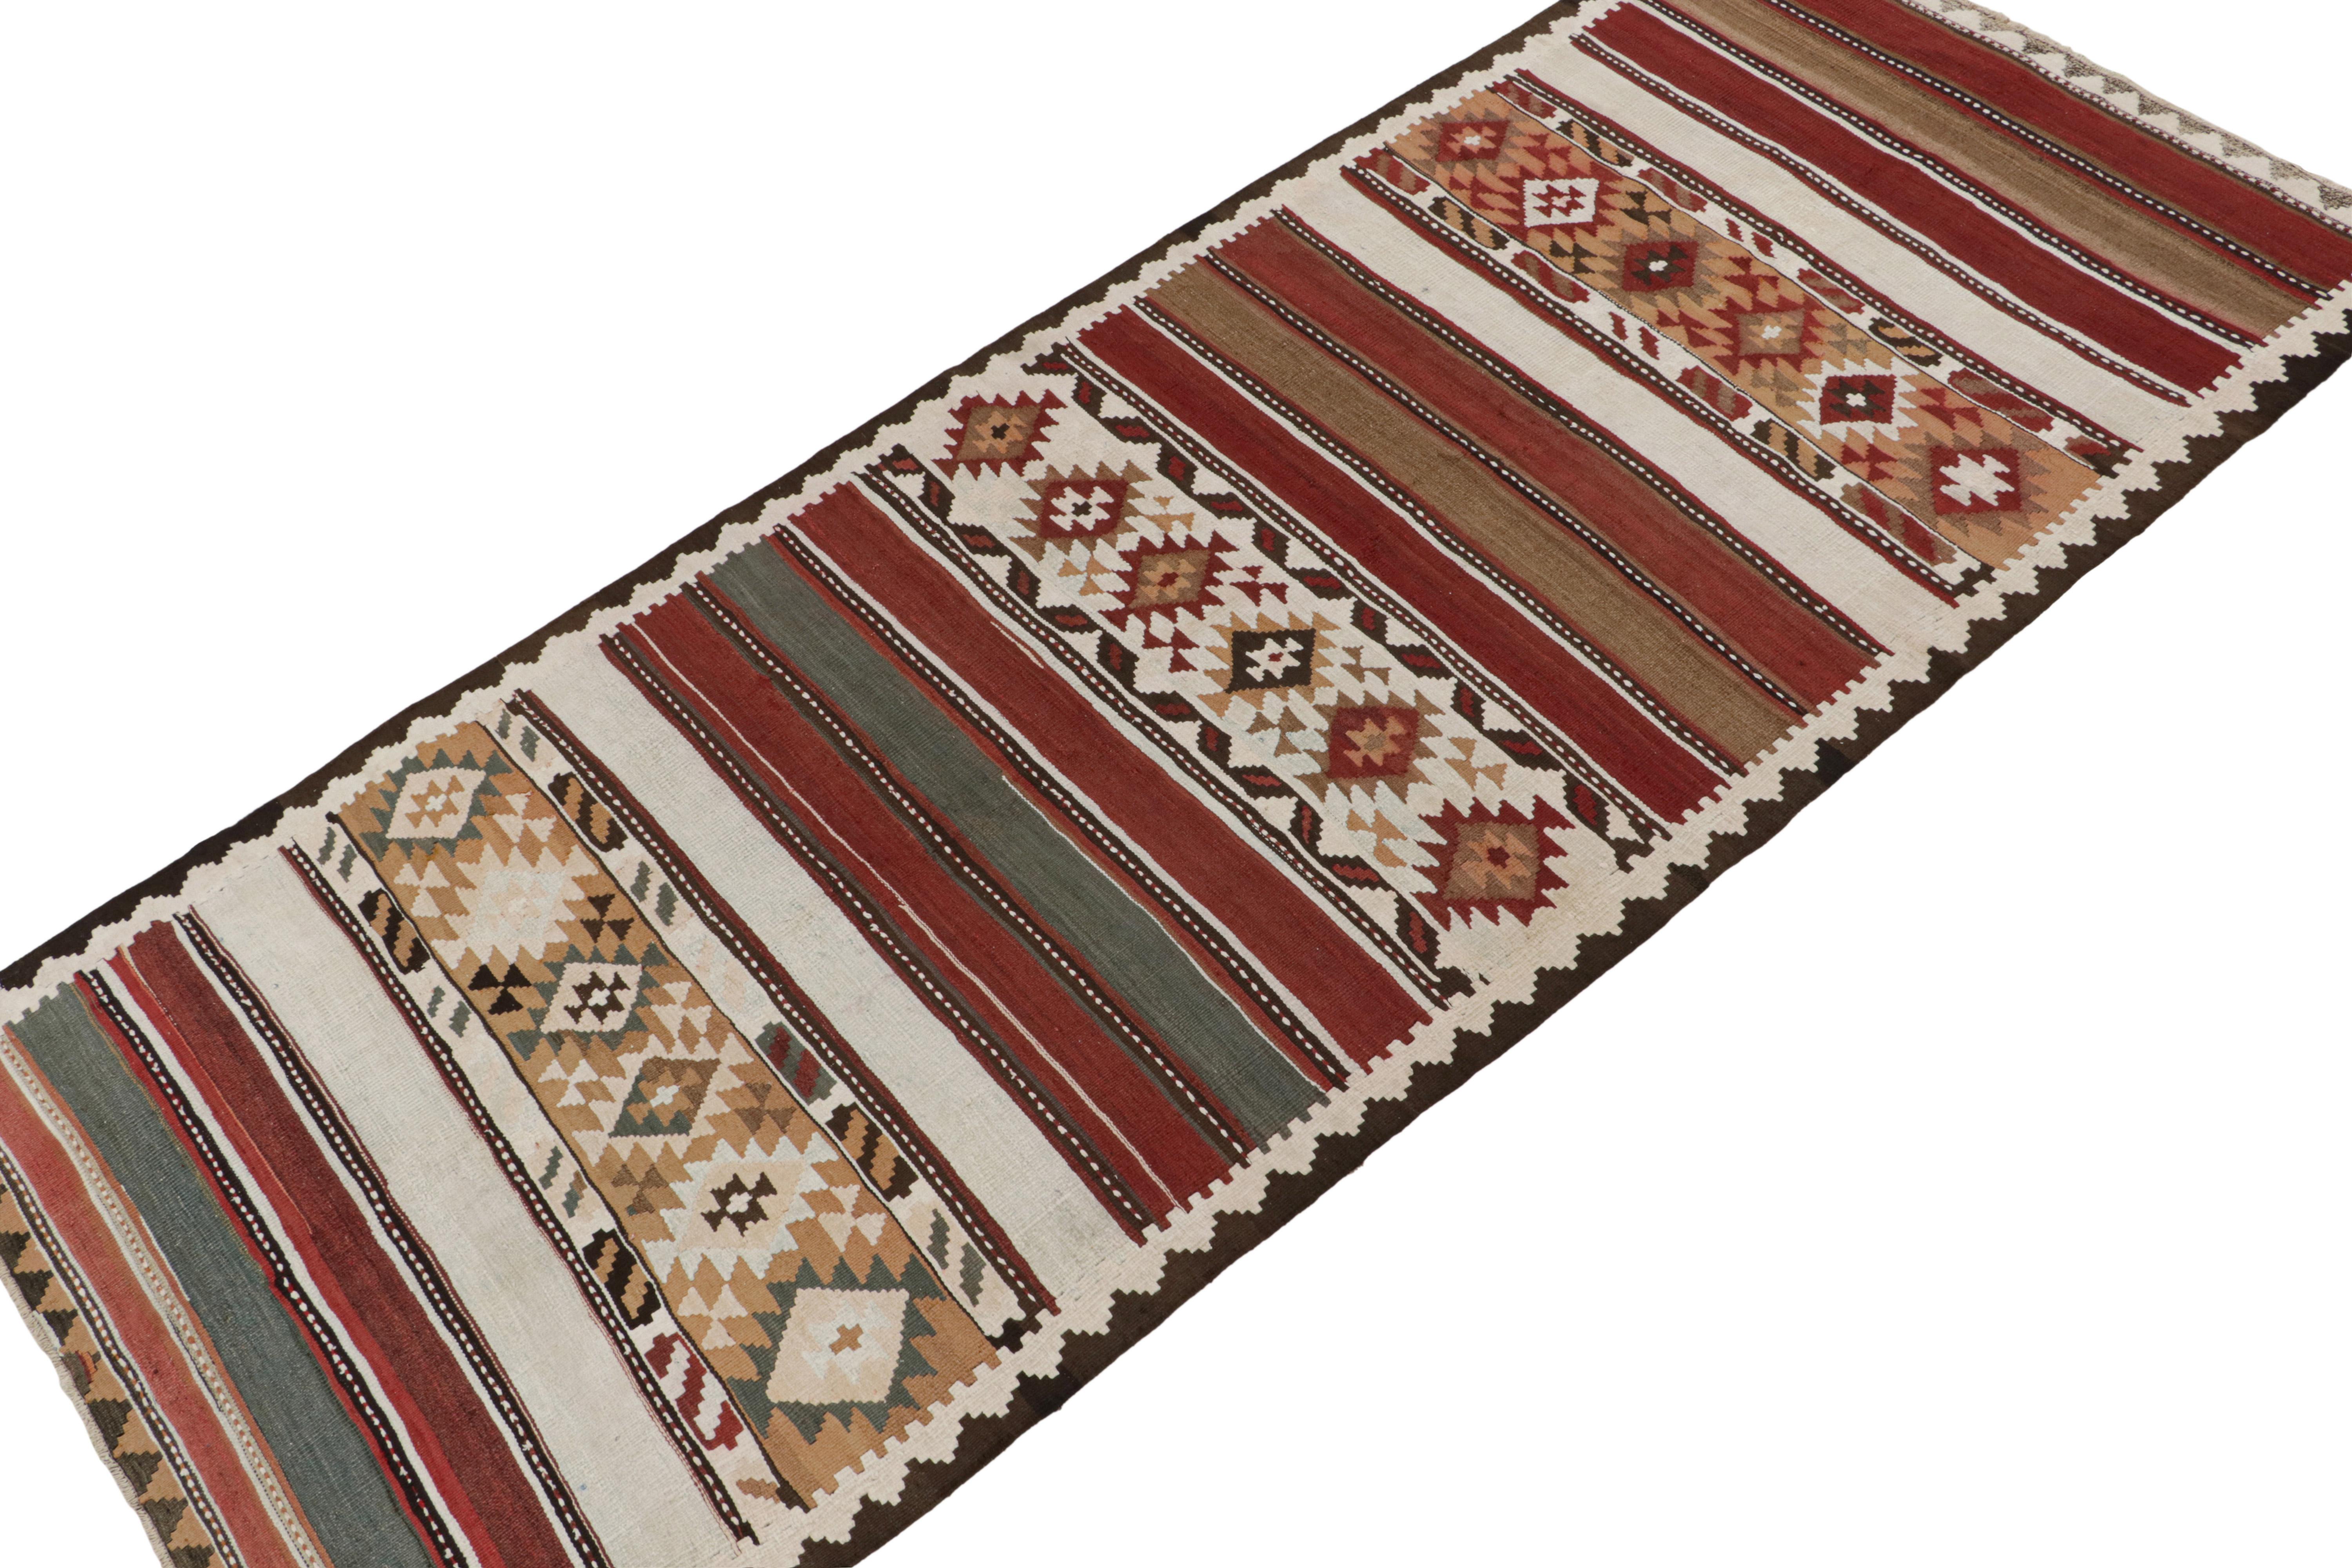 Hand-Knotted Vintage Shahsavan Persian Kilim in Red, White and Beige-Brown Geometric Patterns For Sale